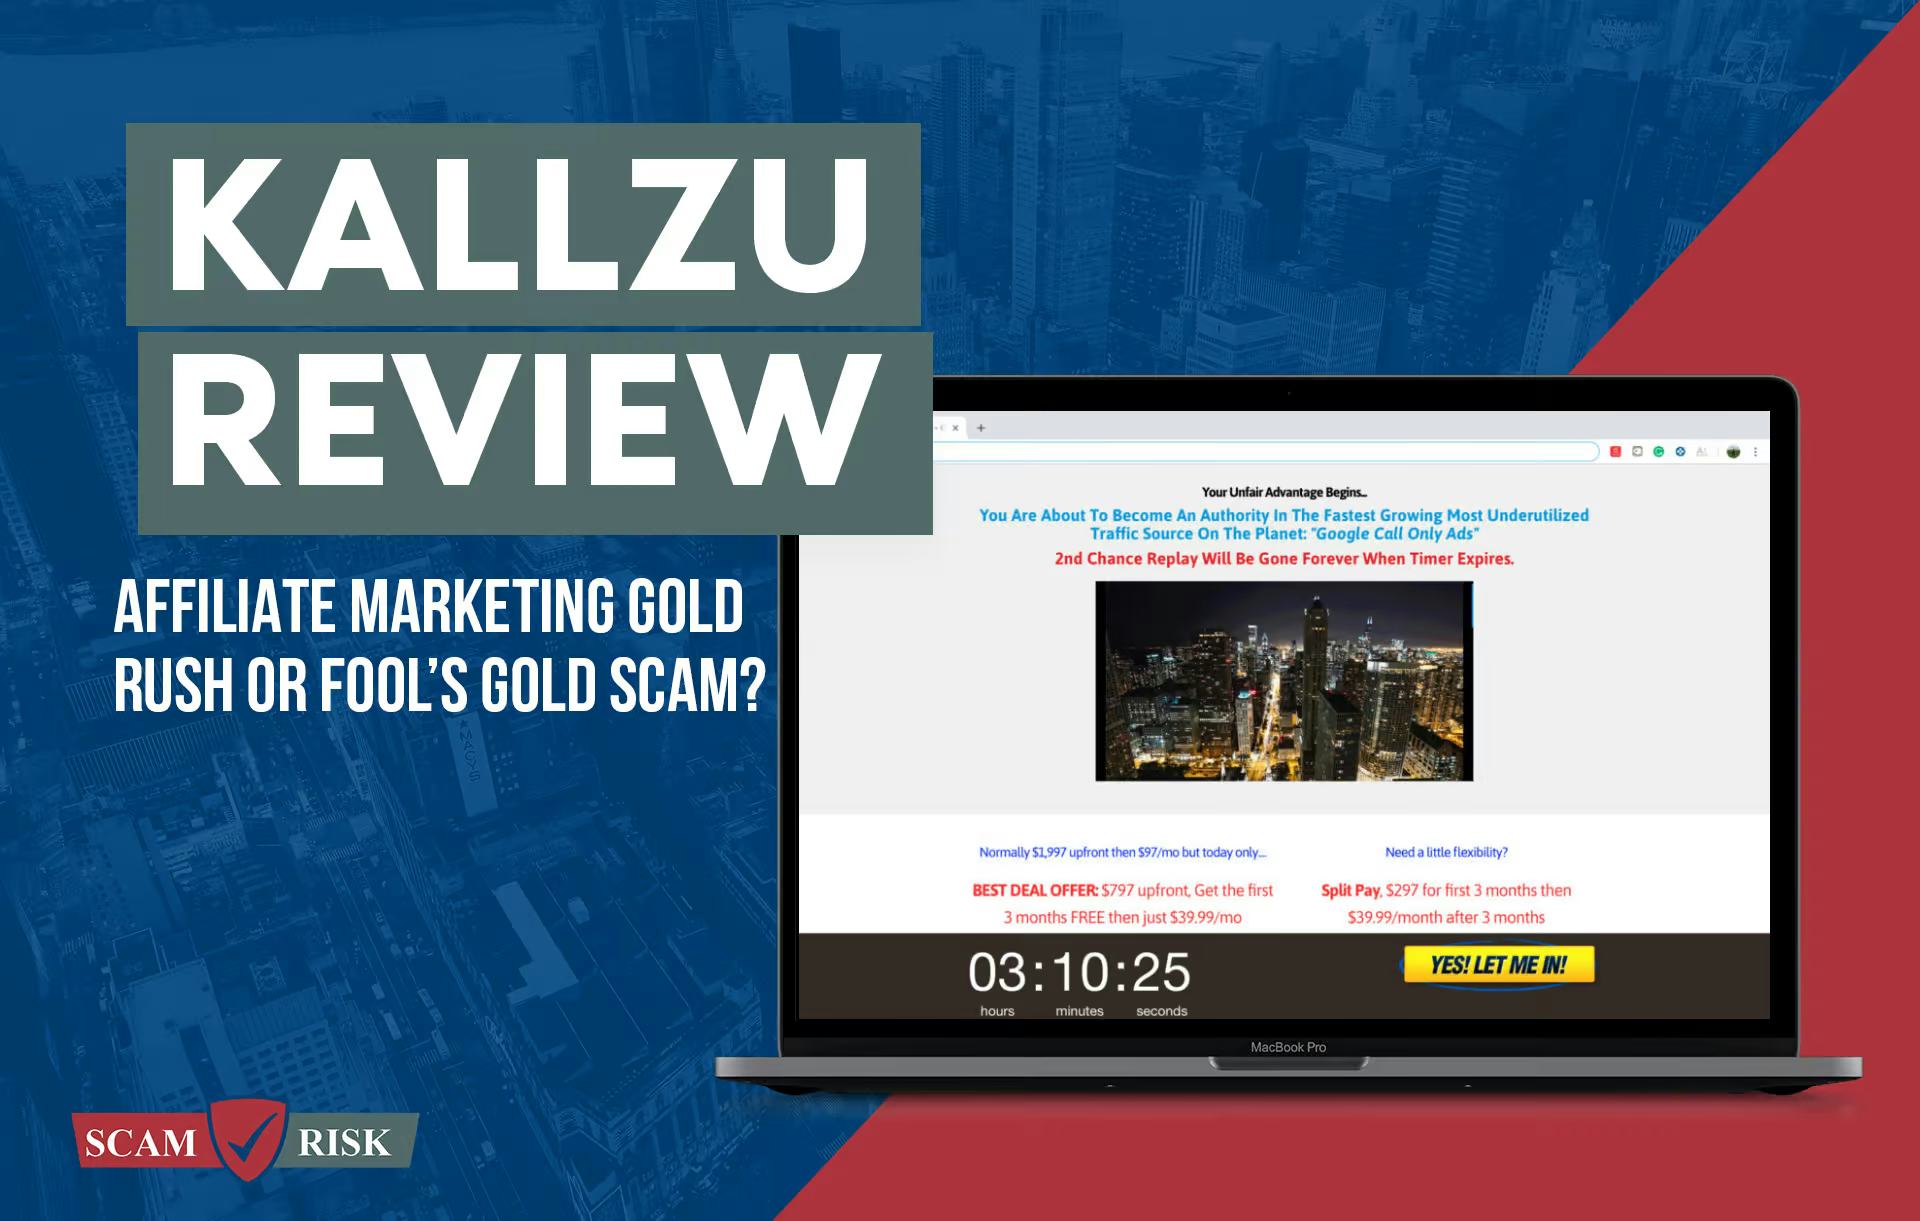 Kallzu Review: 5 Things To Know